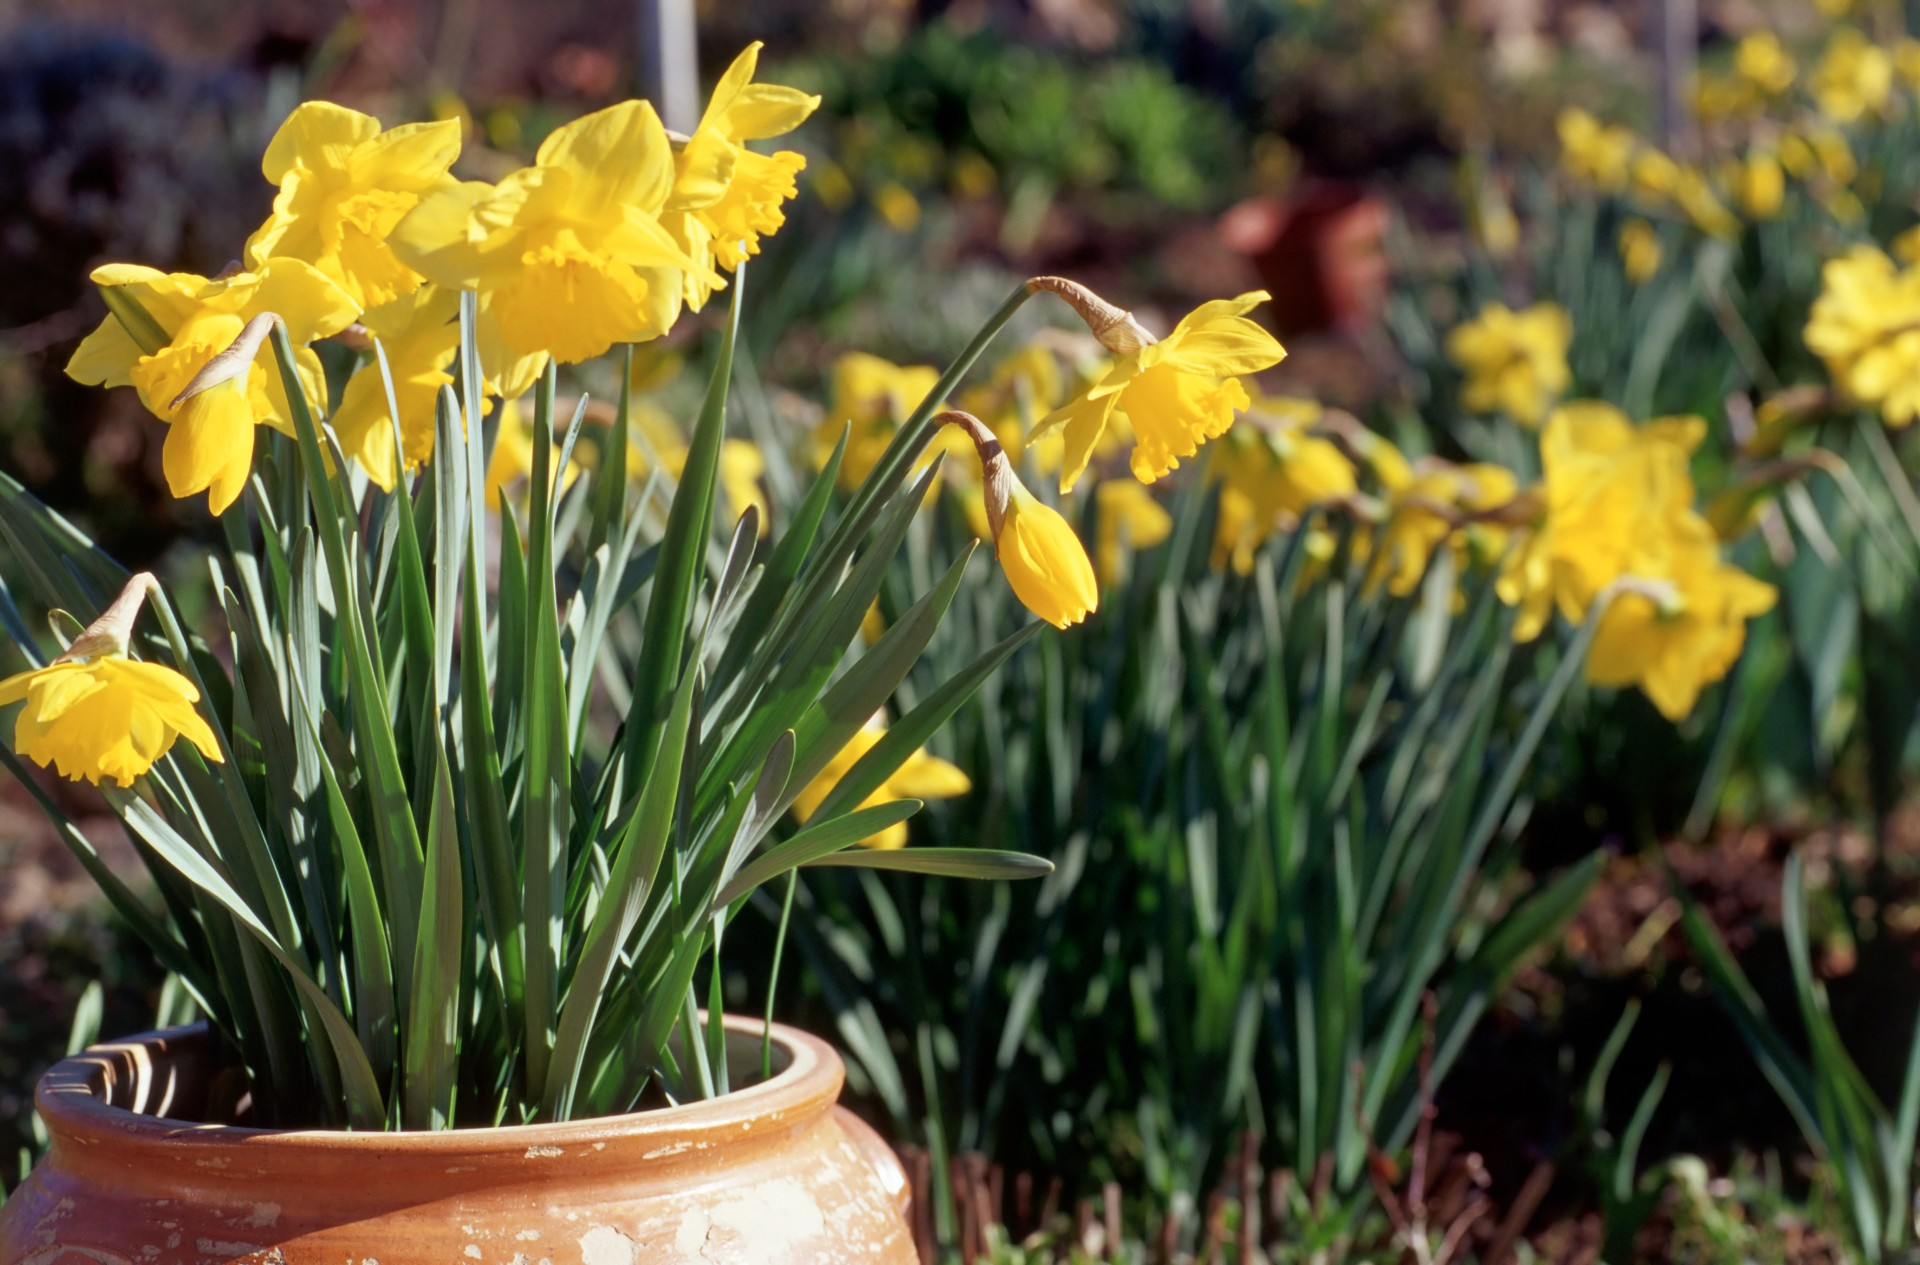 Delightful Daffodils Are Super Easy to Grow. Here's How